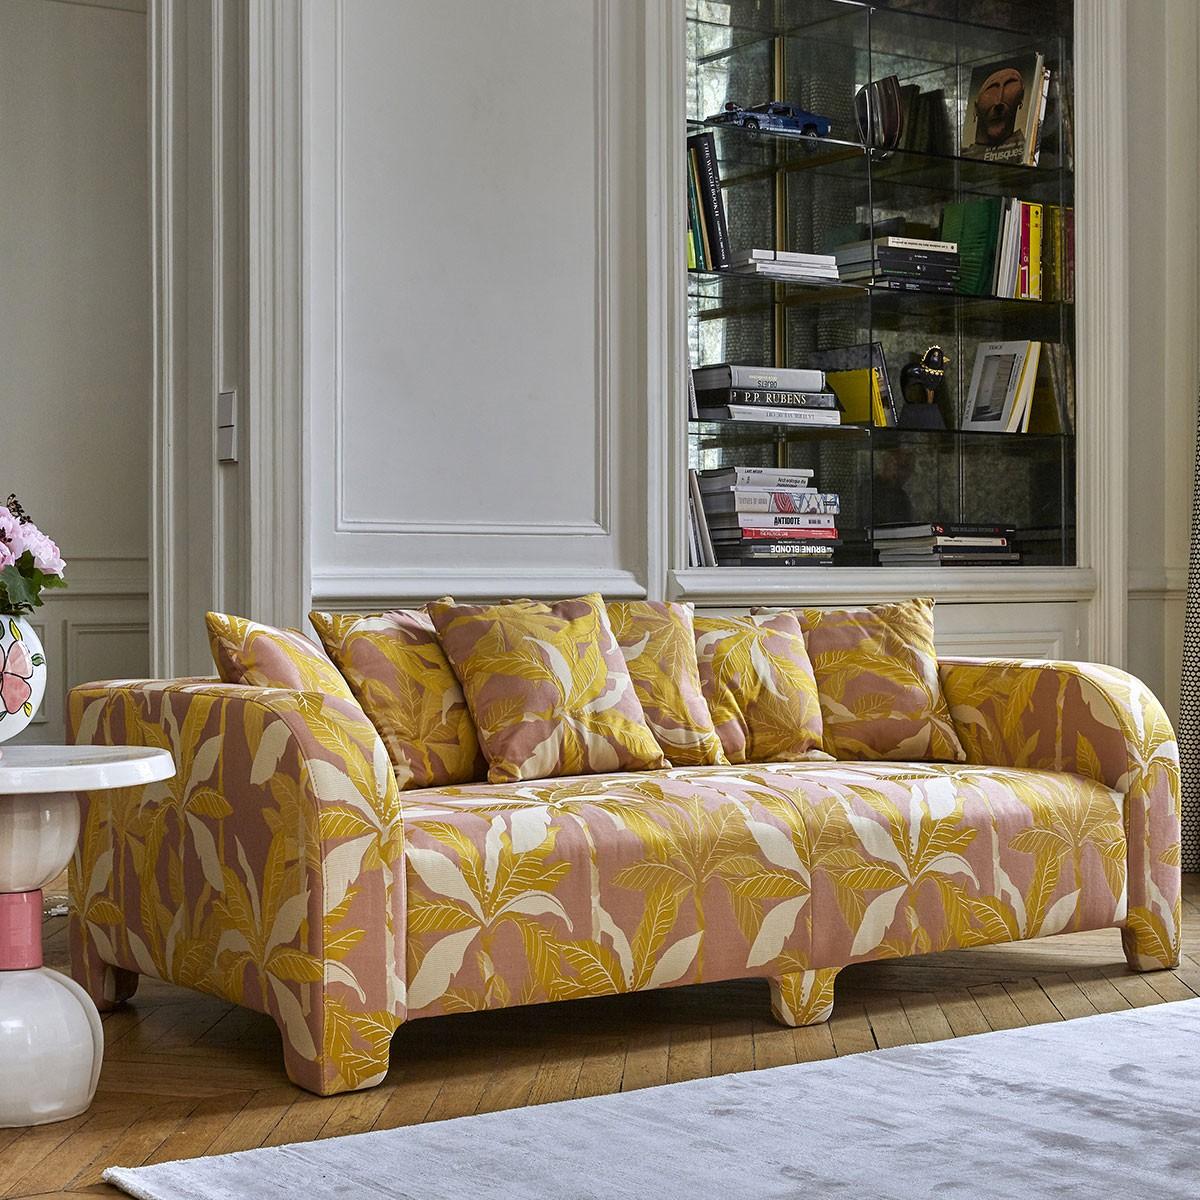 Popus Editions Graziella 4 seater sofa in pink como velvet upholstery

A foot that hides another. A cushion that hides another. A curve that hides another with contemporary lines and a base like a punctuation mark, this sofa gives pride of place